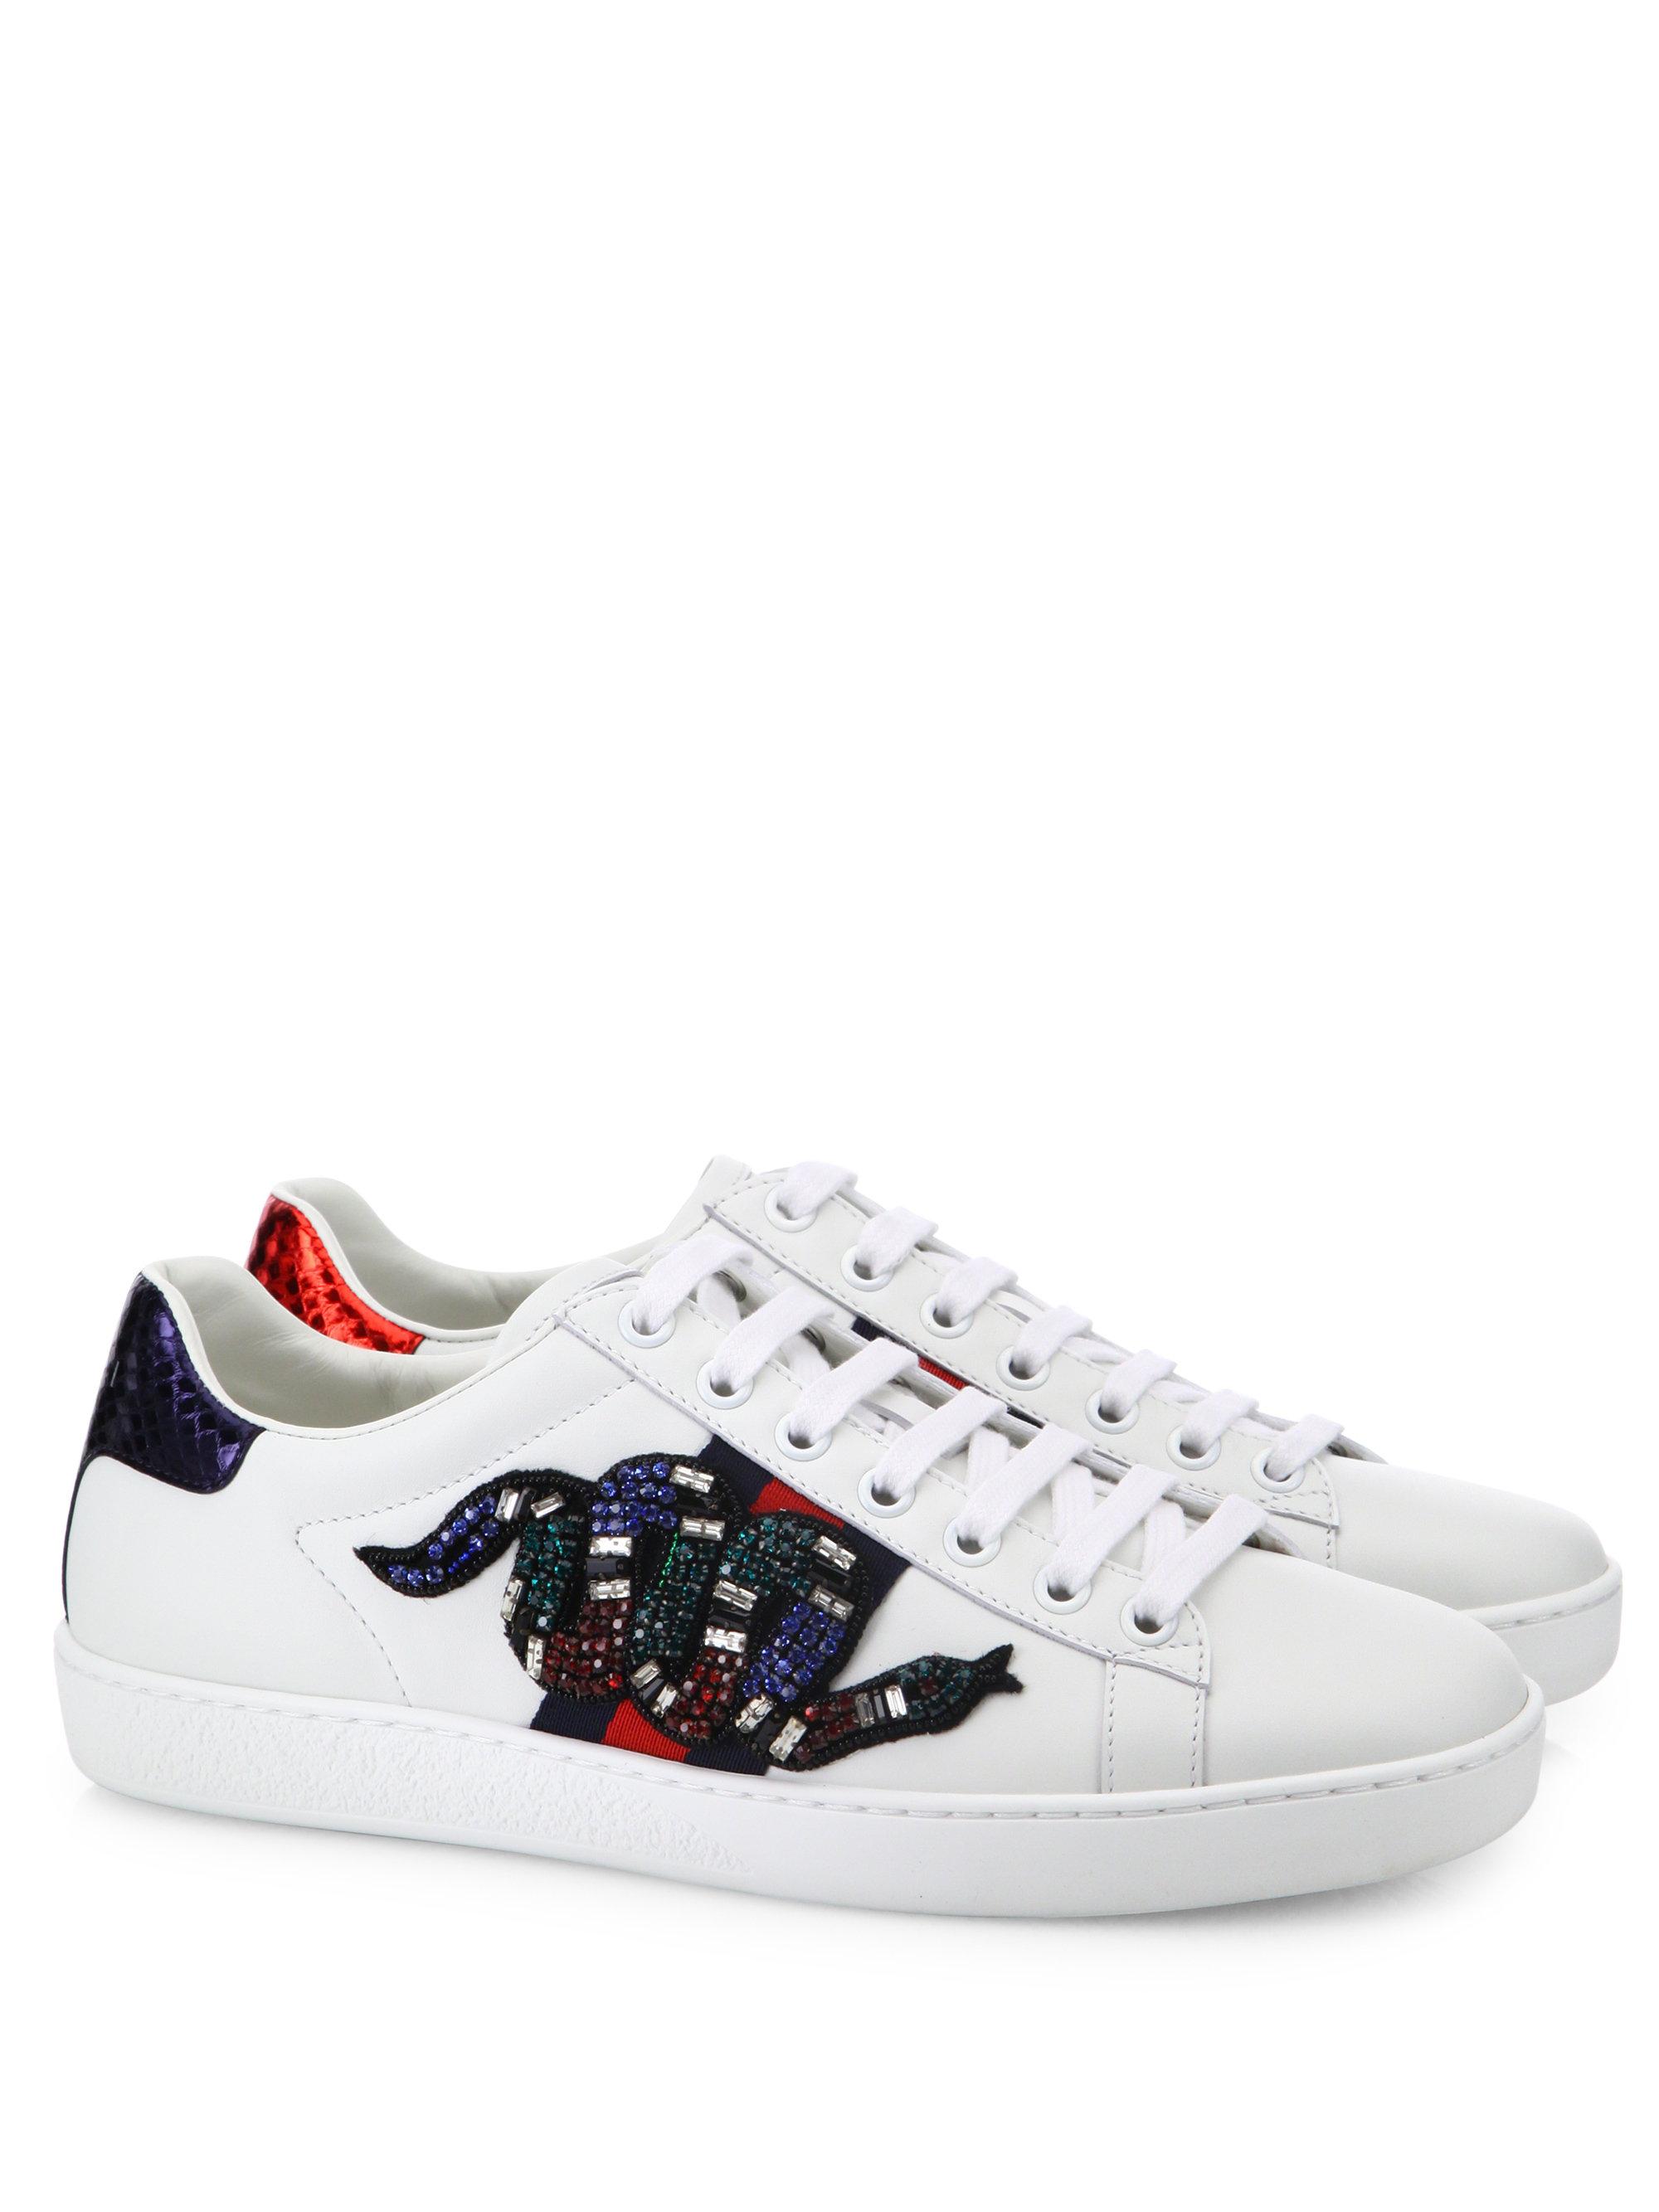 Gucci Ace Crystal-embroidered Snake Leather Low-top Sneakers Lyst